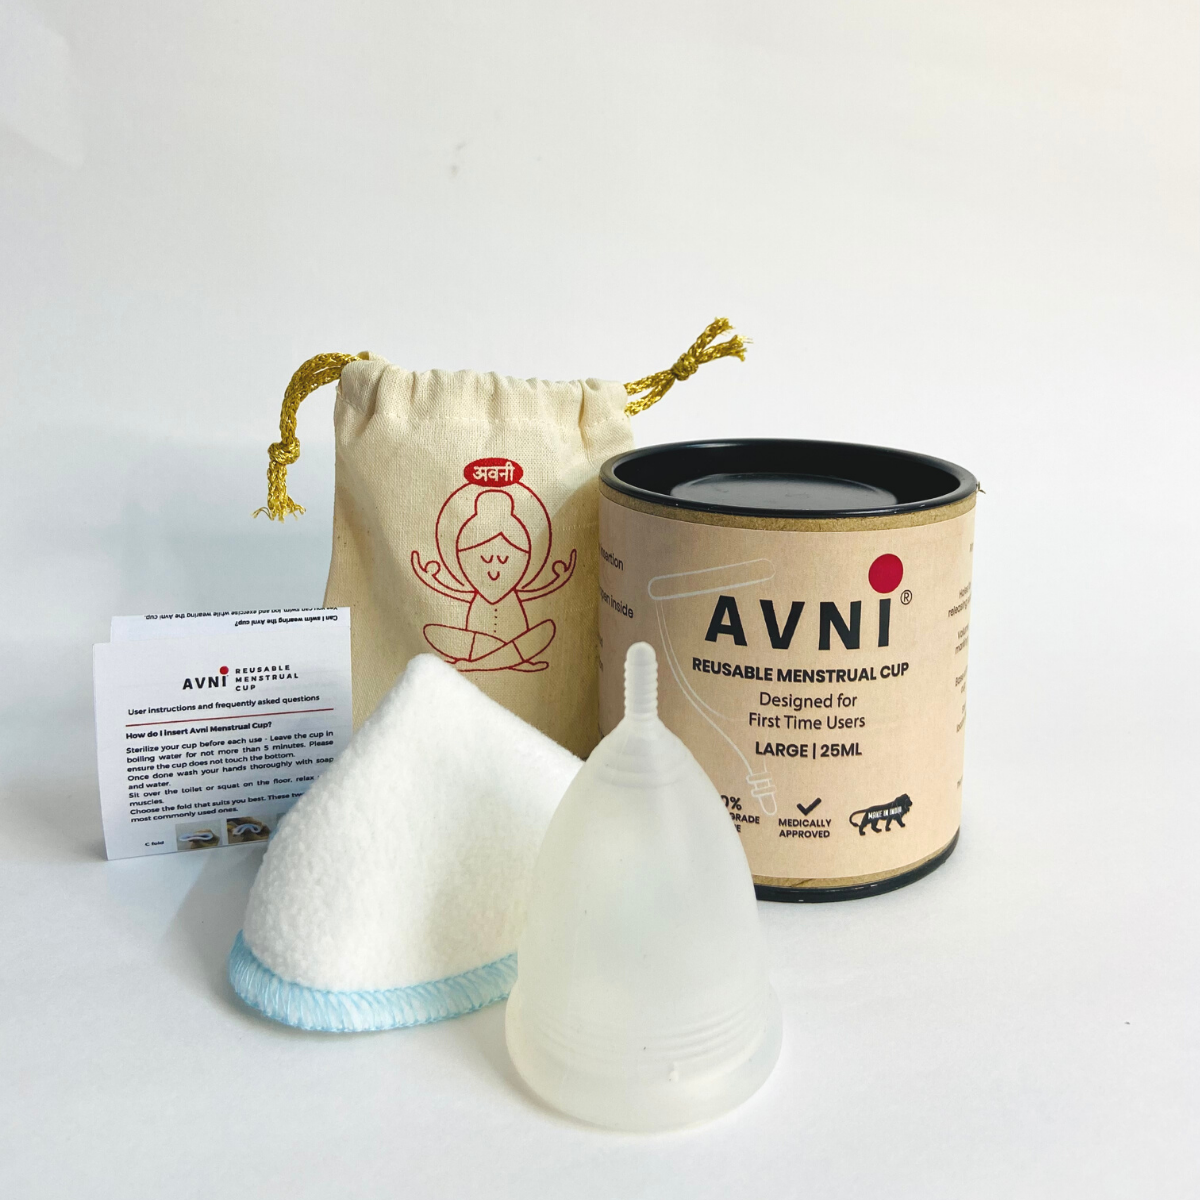 Avni Large Menstrual Cup + Free antimicrobial wipe cloth - 100% medical grade silicone cup, designed for first time users